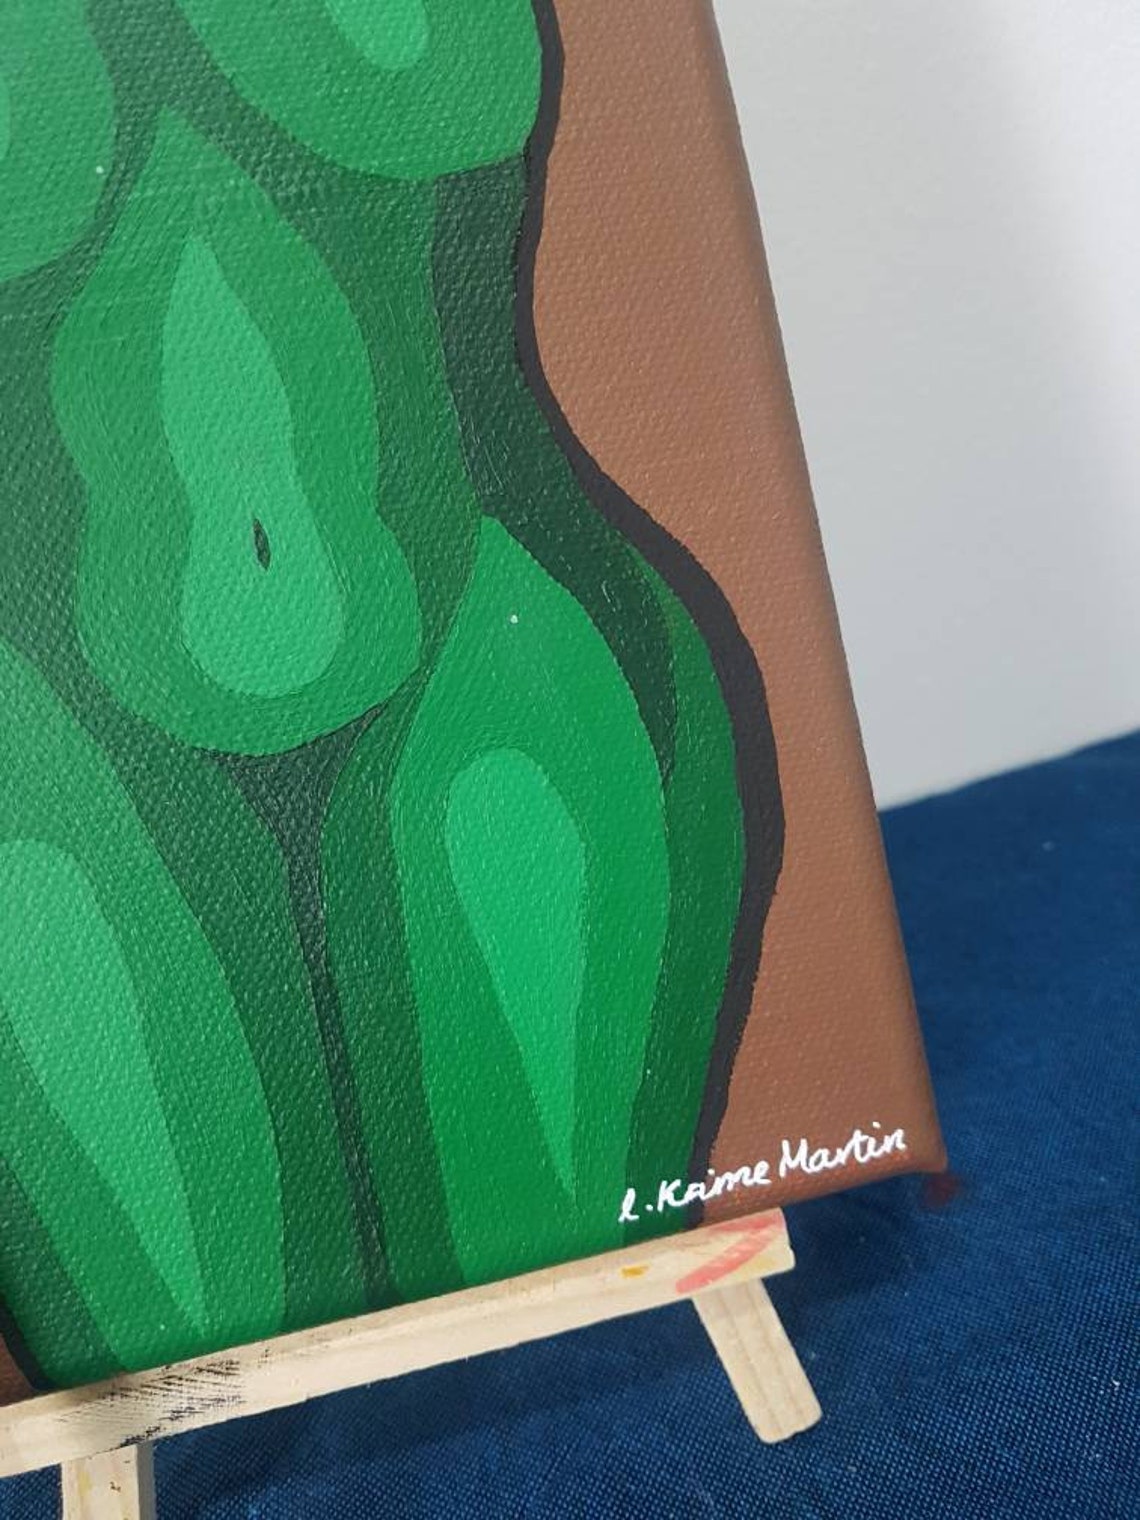 Original Acrylic Painting Of Nude Woman In Shades Of Green Etsy